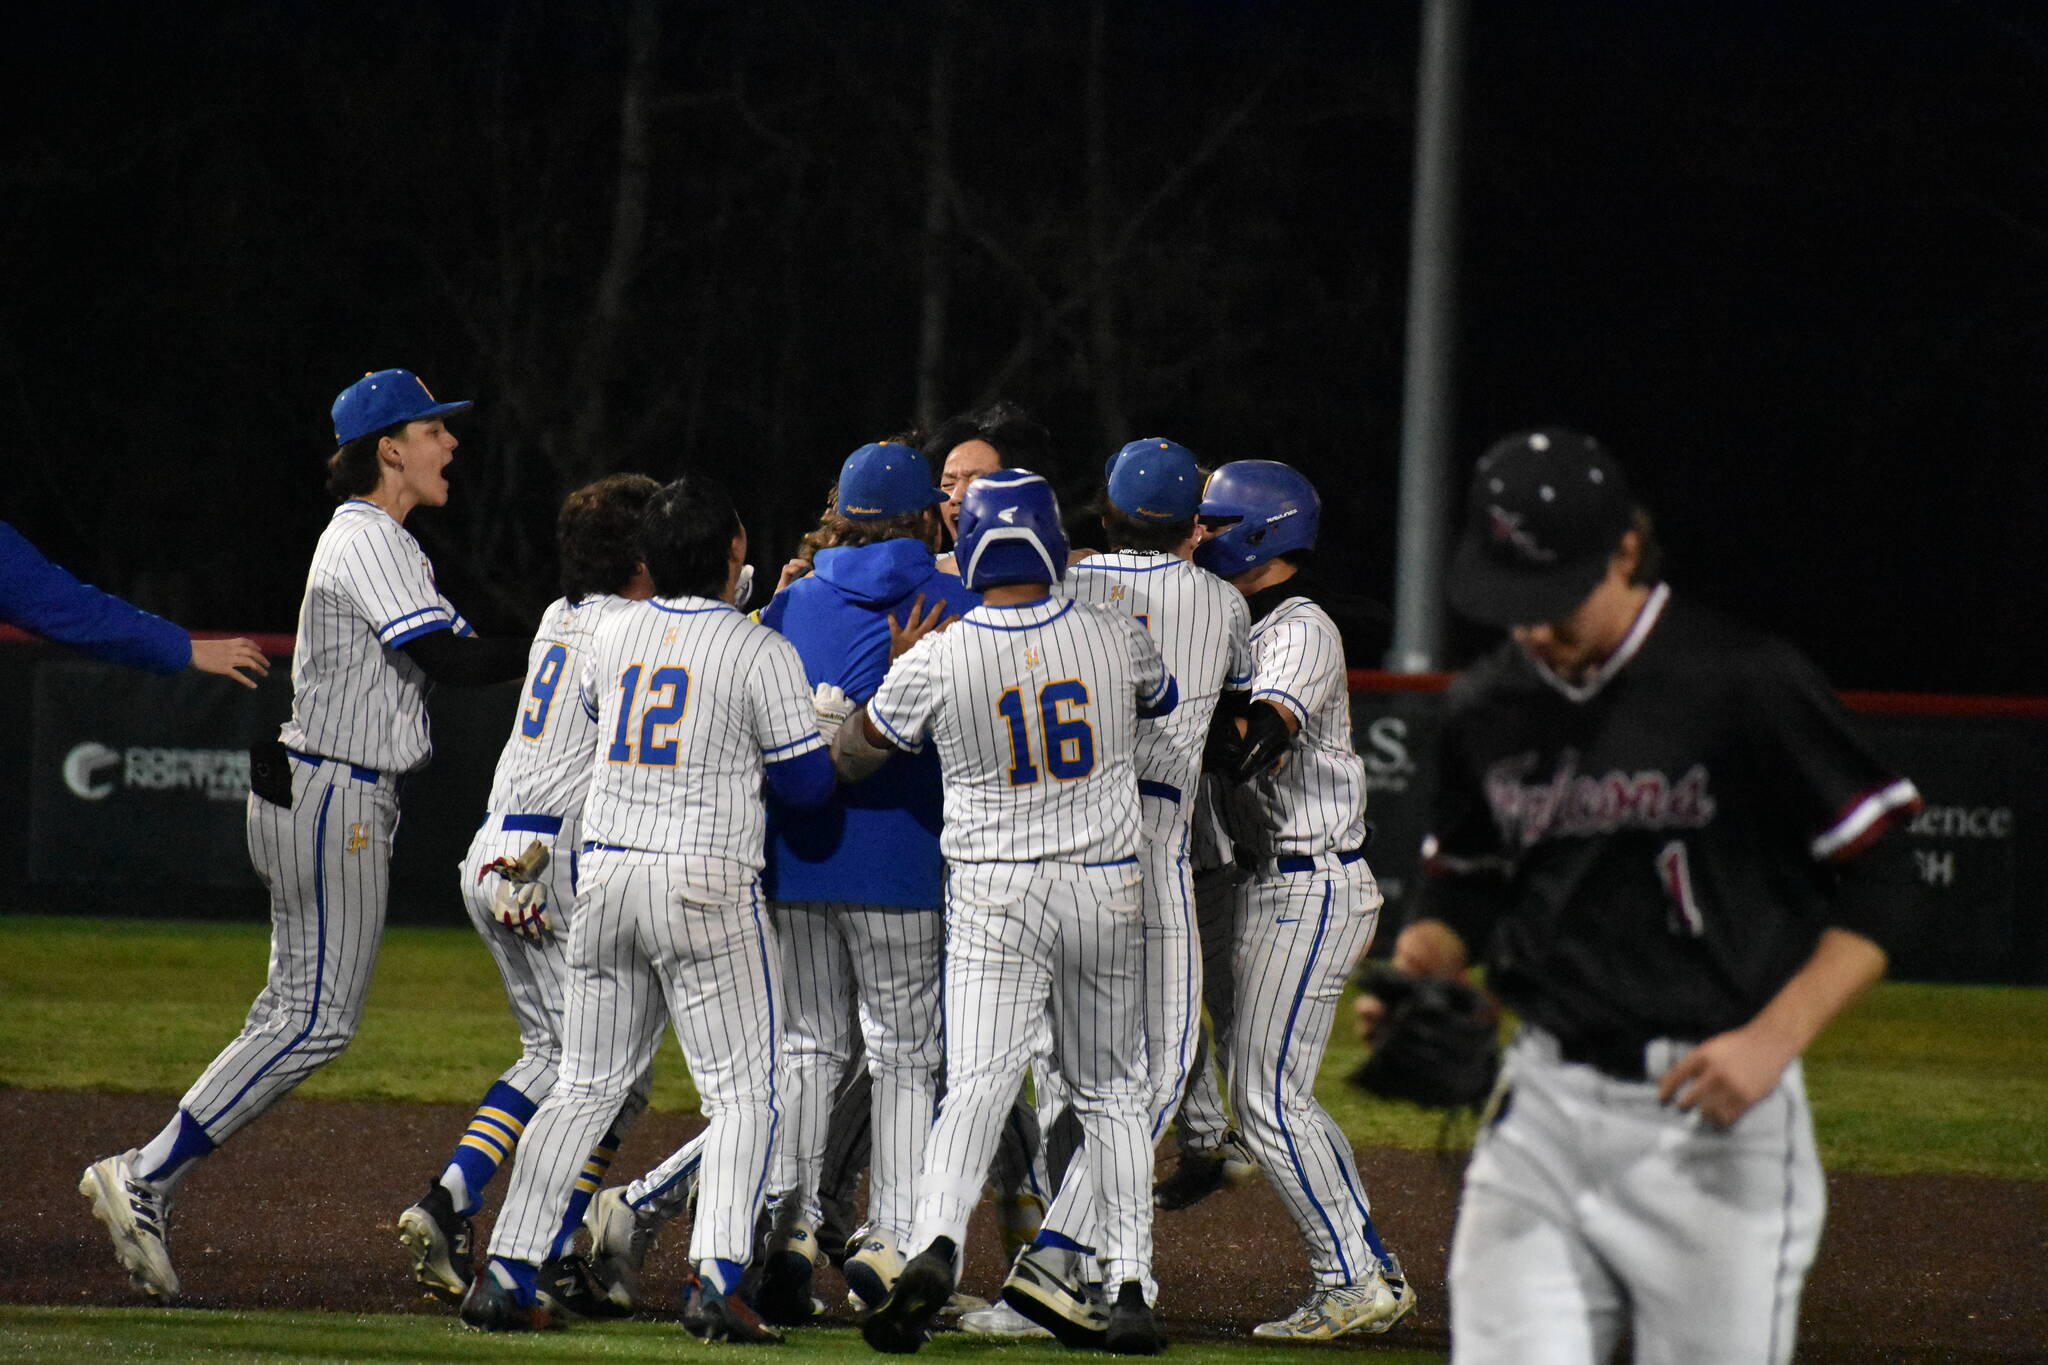 Hazen celebrates their walk-off win as Christopher Moore leaves the field. Ben Ray / The Reporter